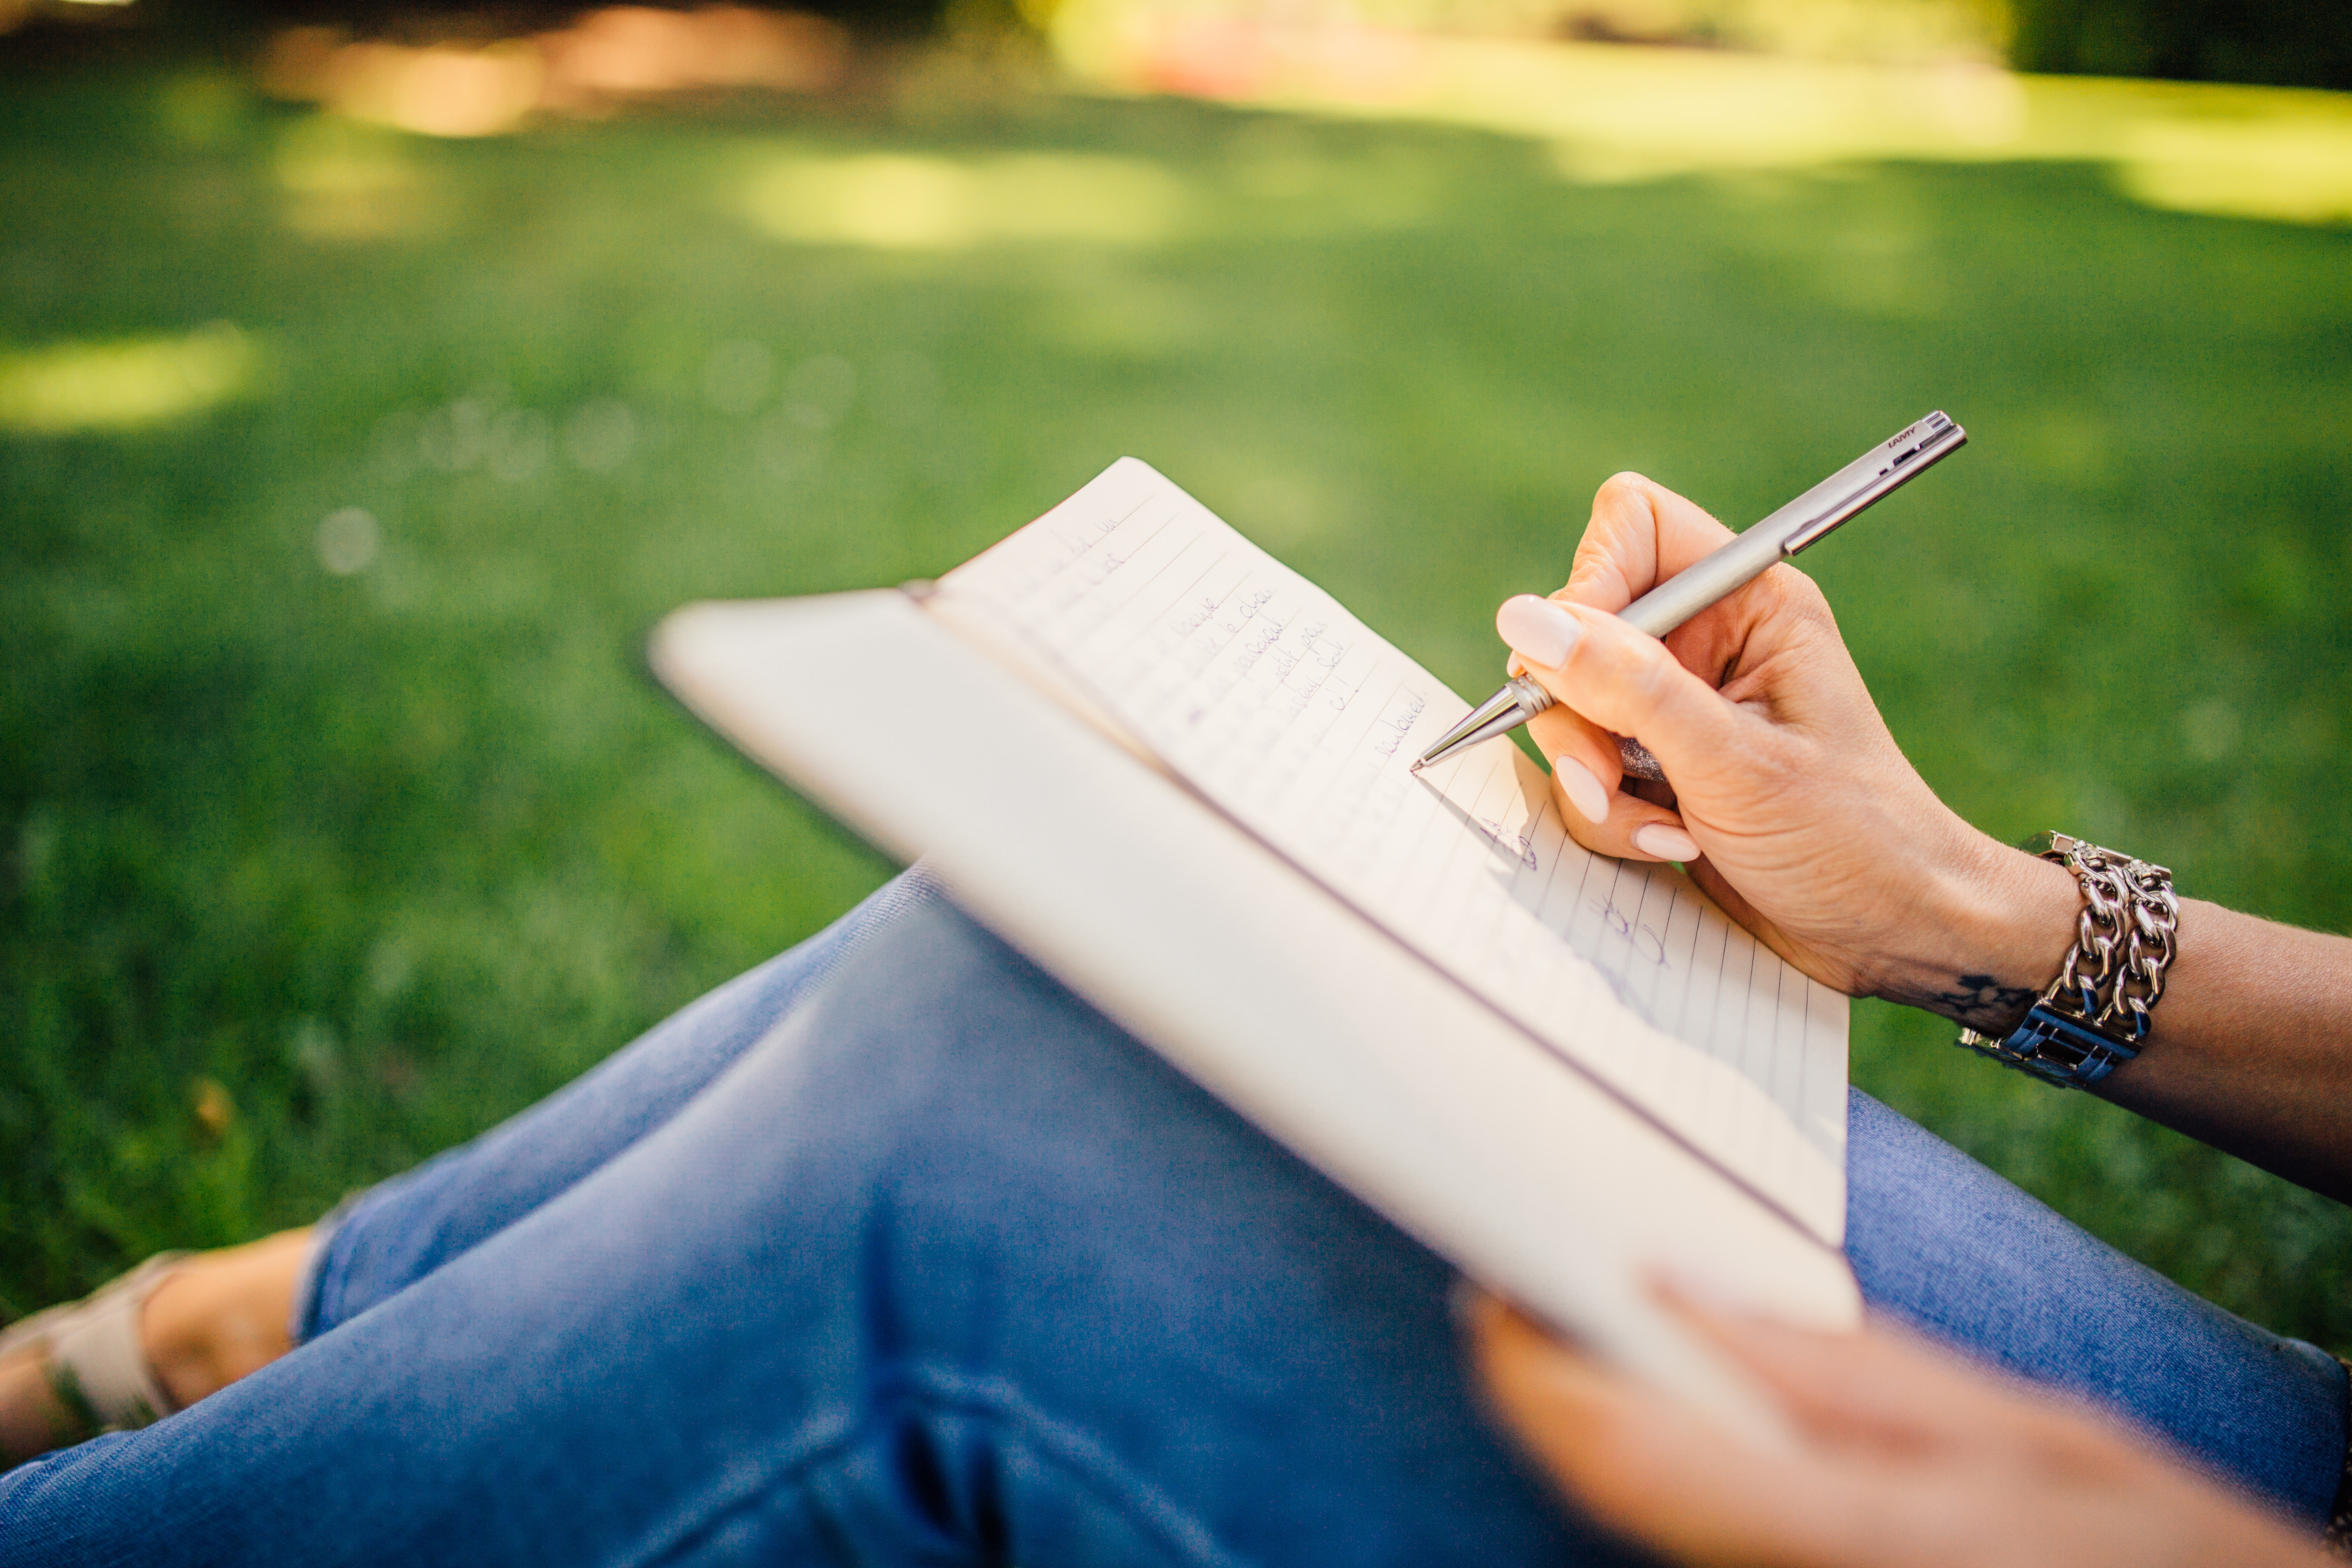 Keeping a journal is a good mental exercise | Photo by Negative Space from Pexels